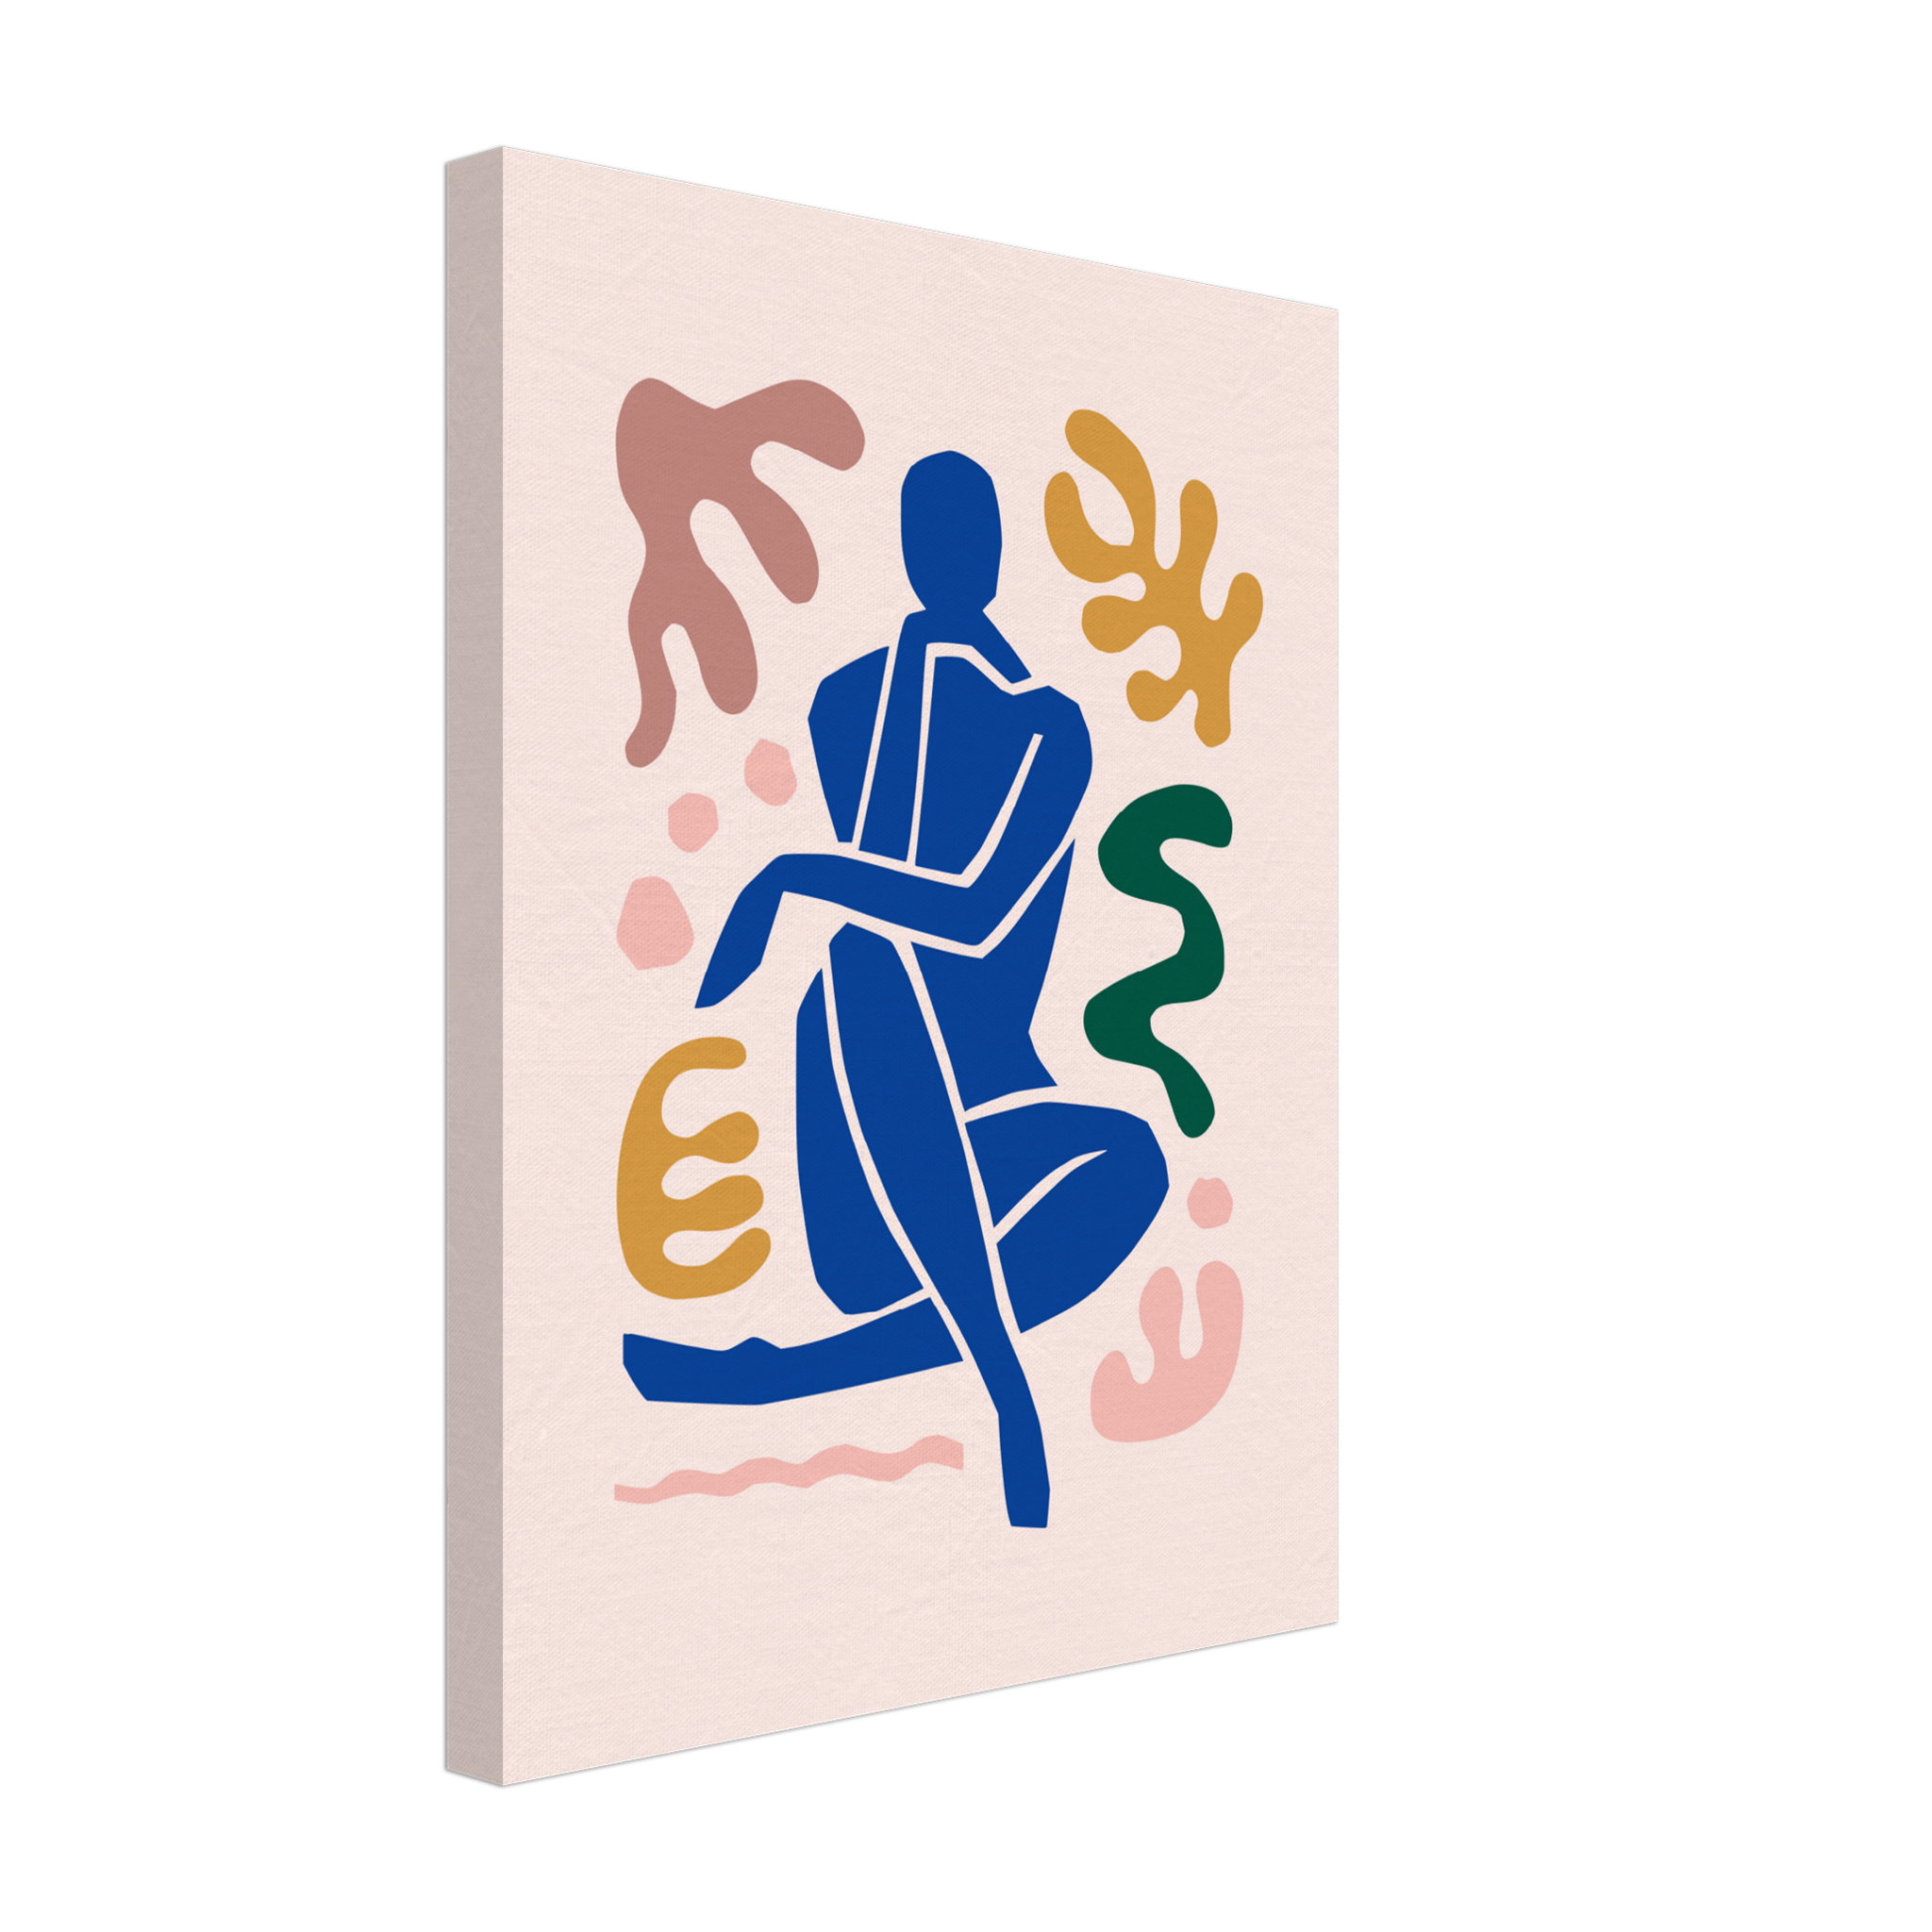 Matisse-inspired Abstract Female Figure Canvas